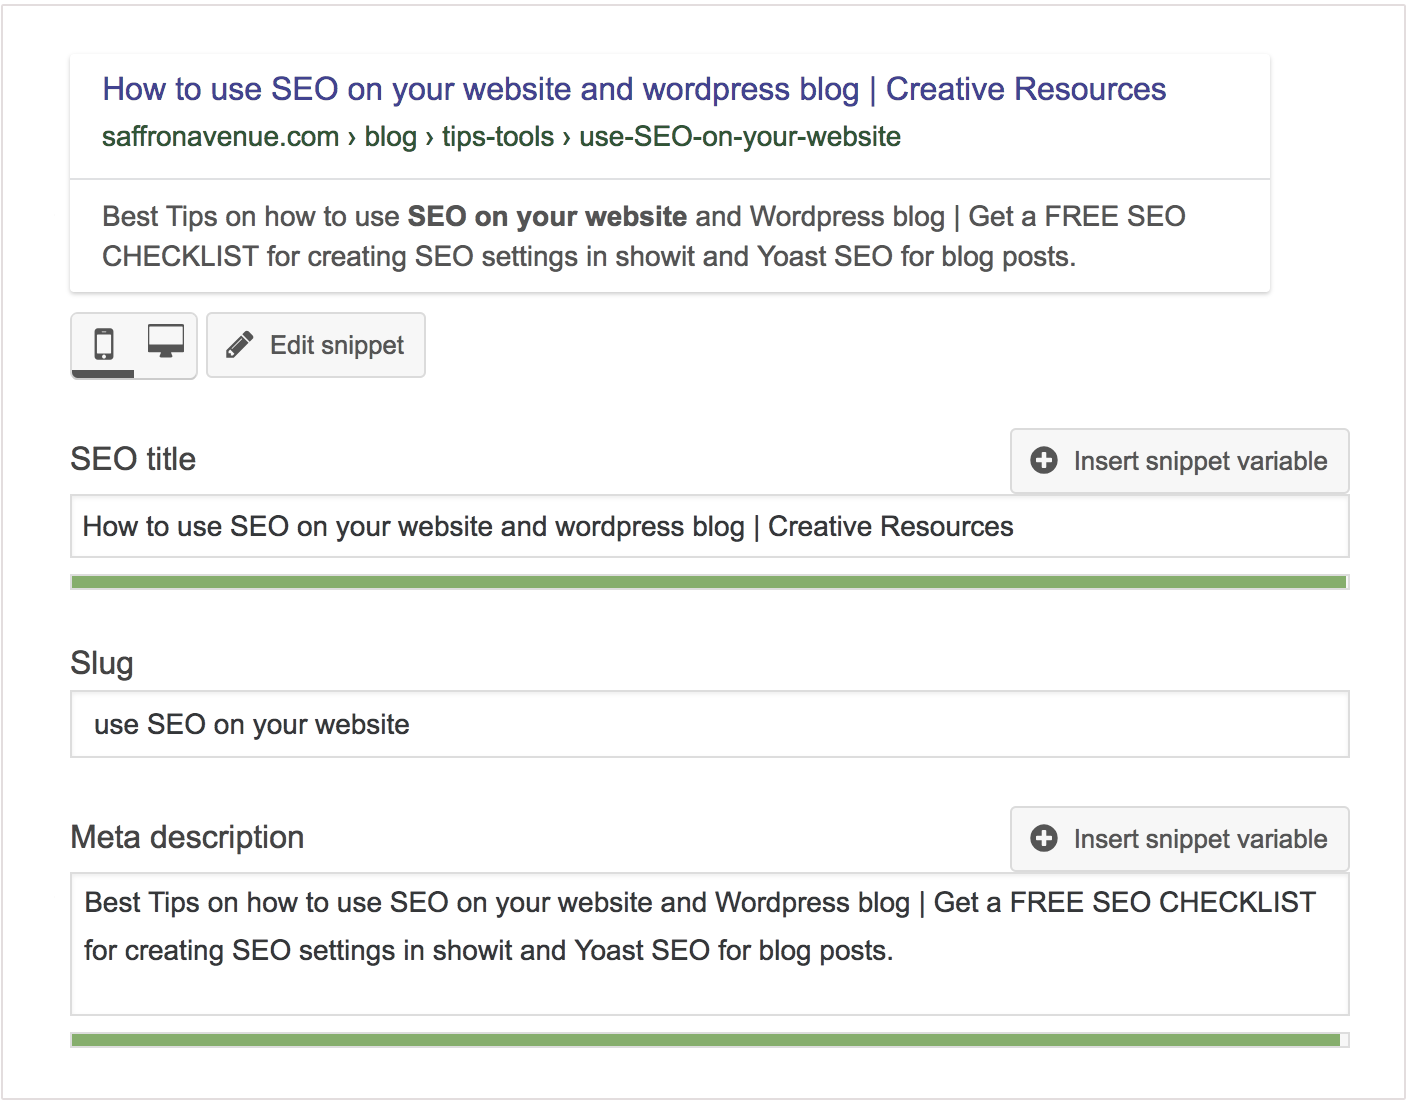 Tips on how to use SEO on your website and WordPress blog | Get a FREE CHECKLIST for creating SEO settings in Showit and Yoast SEO for blog posts.